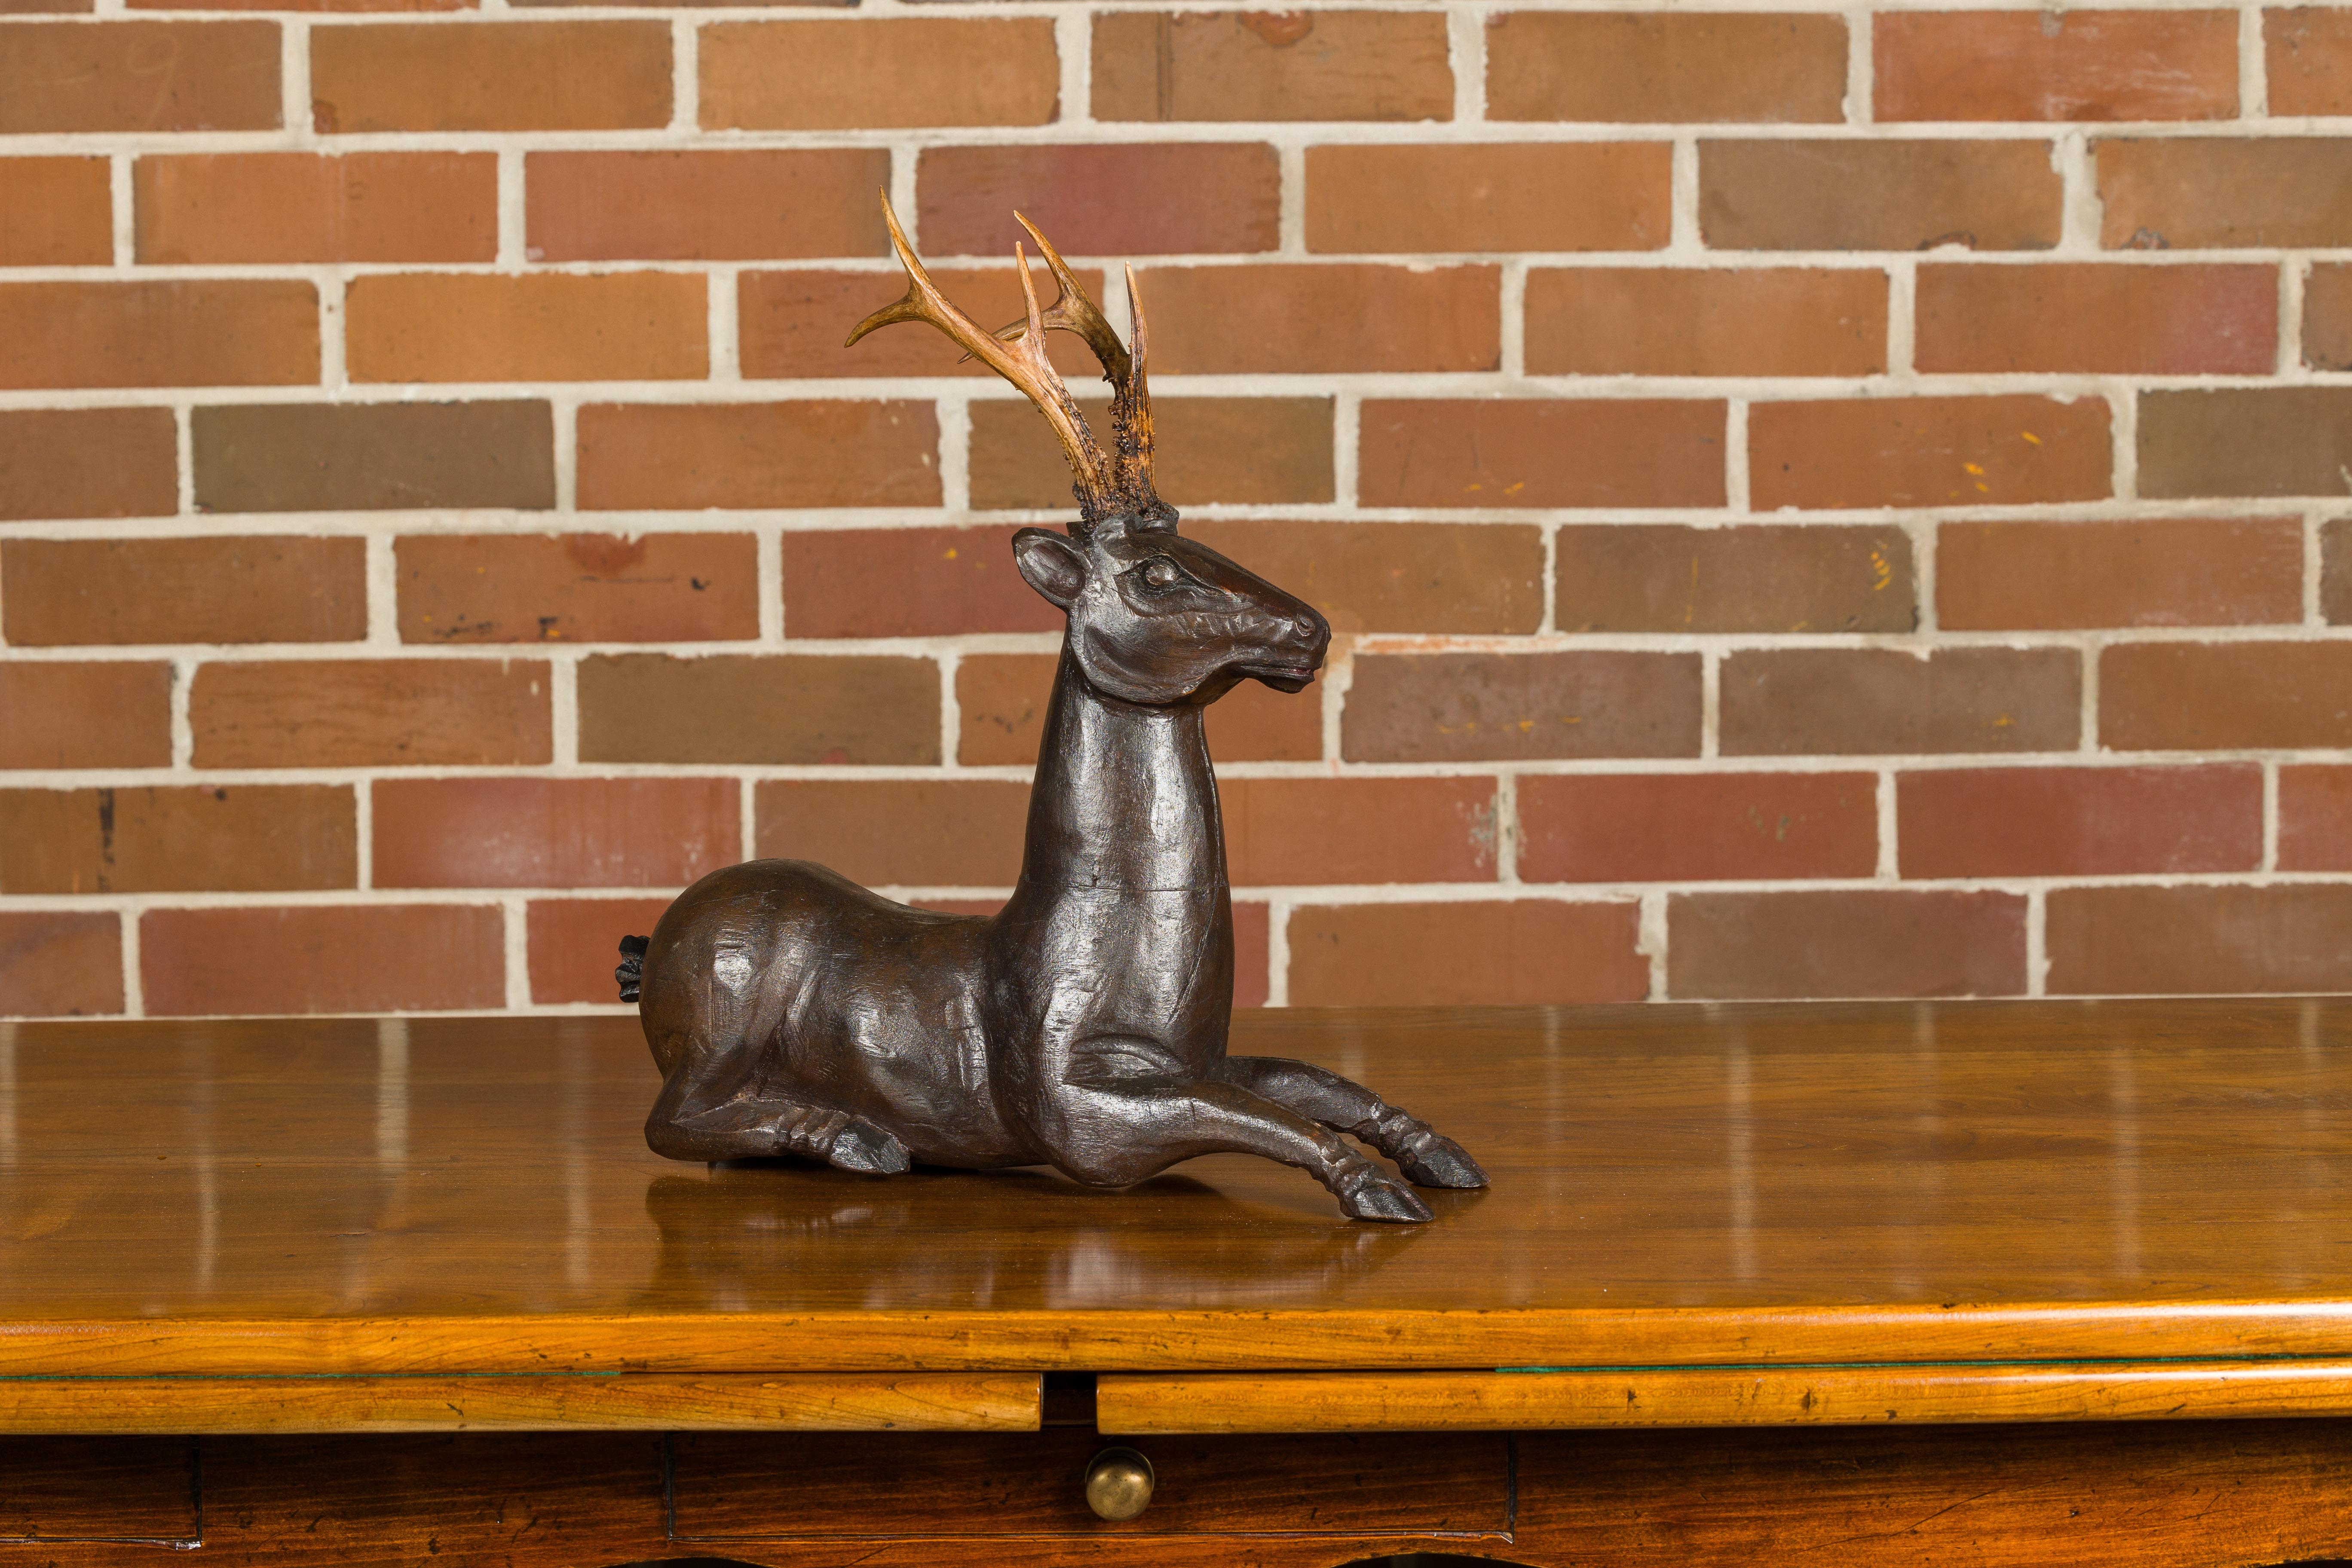 An English carved wooden reclining stag sculpture from the Midcentury period with real antlers. Elevate your interior with this captivating Midcentury English carved wooden reclining stag sculpture, a true testament to craftsmanship and artistry.